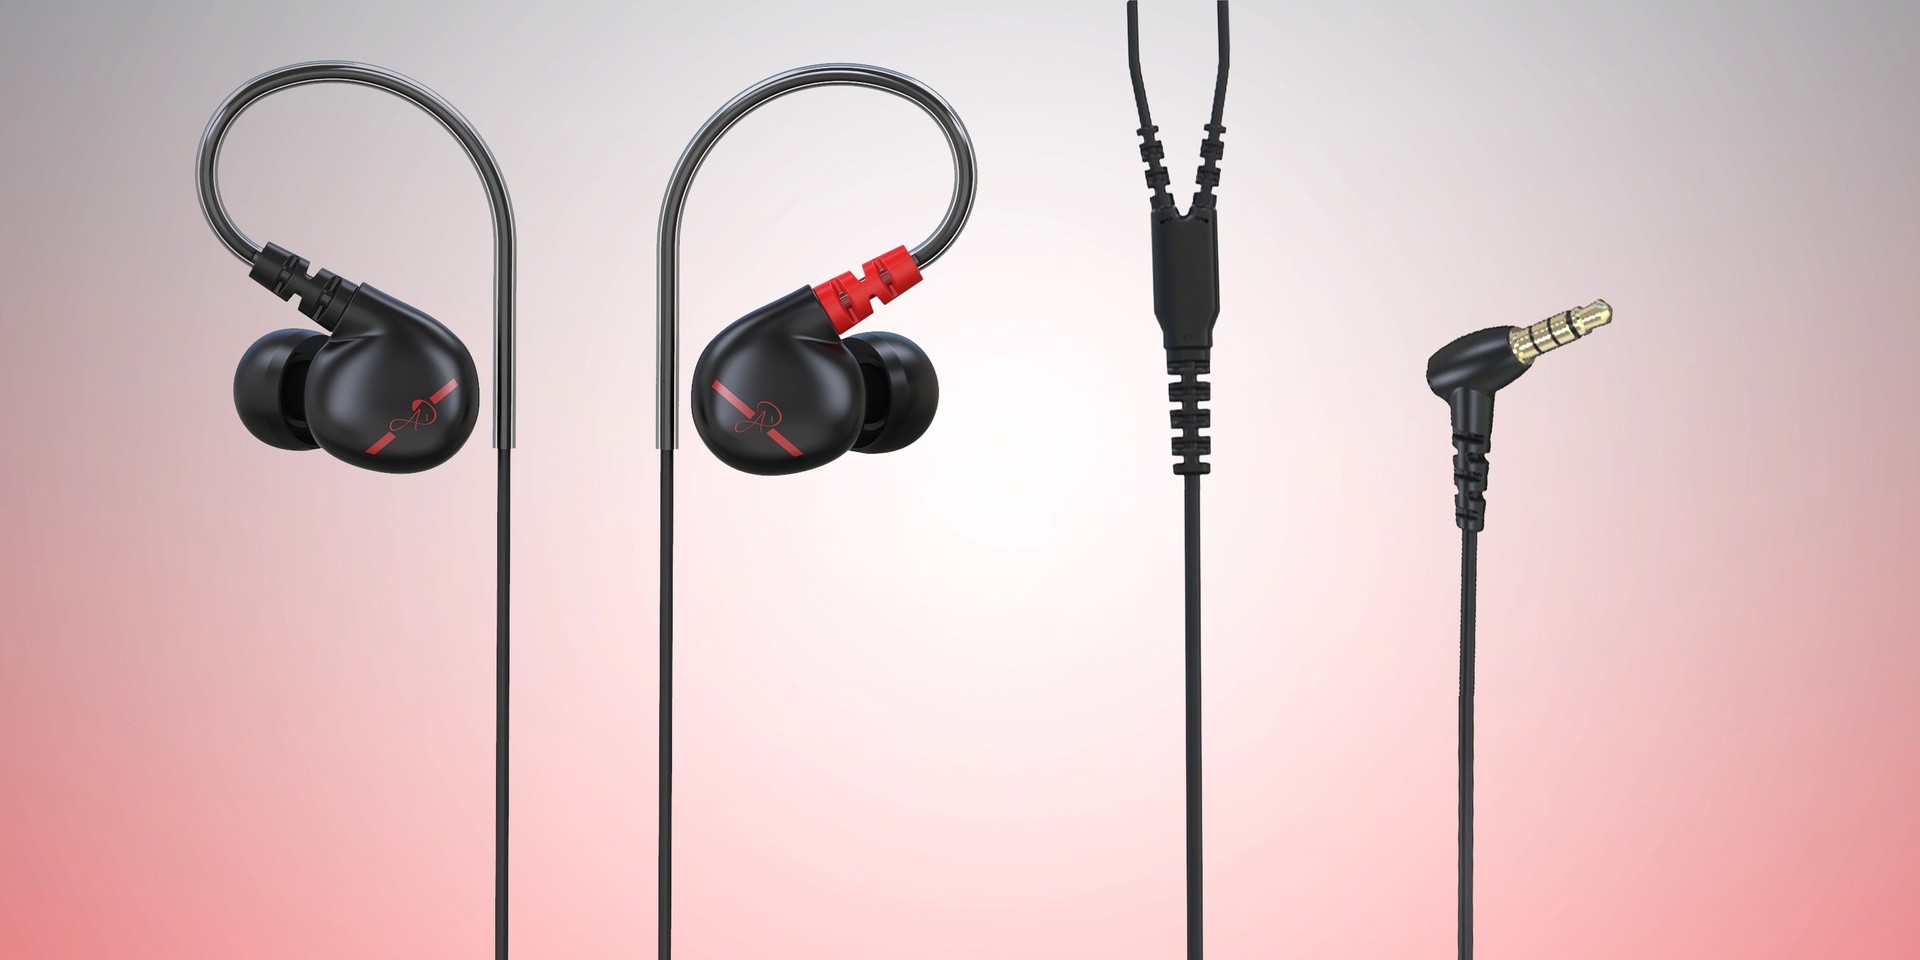 This Singaporean company is making affordable earphones that don't suck